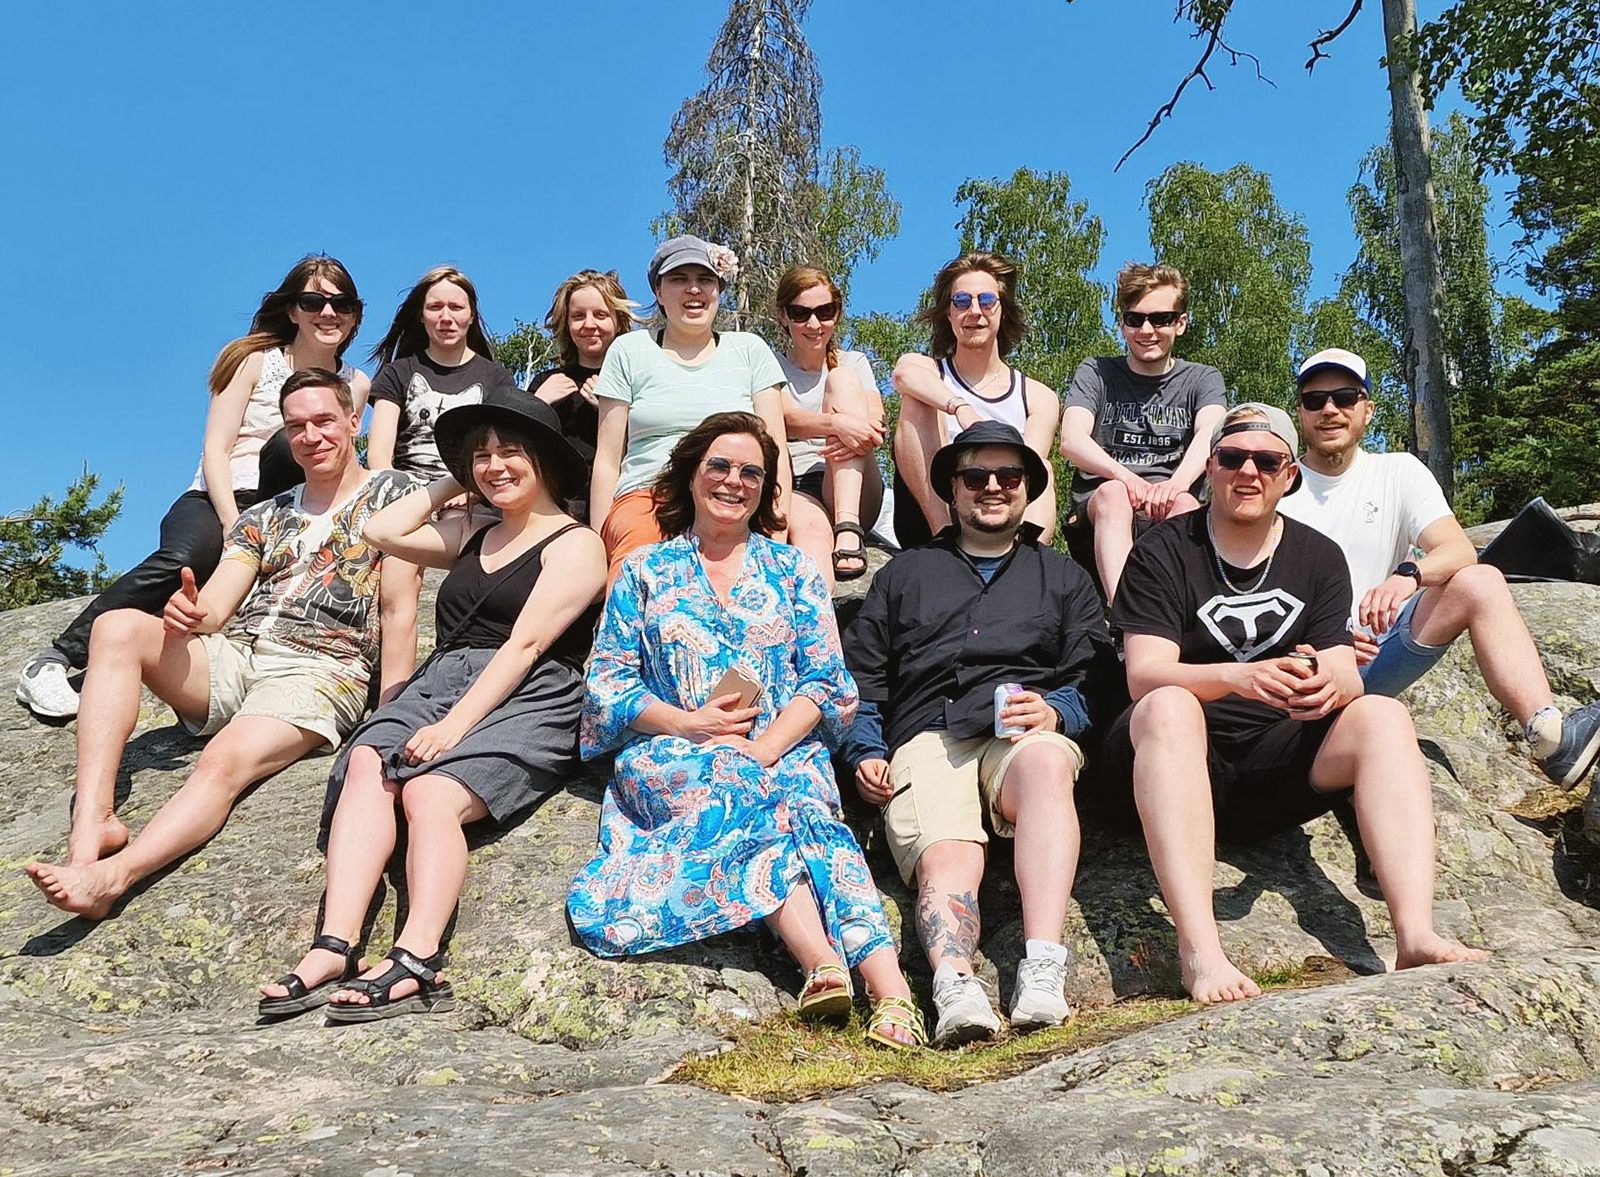 A group photo of 13 Helsinki XR Center team members sitting on a rock and smiling at the camera.